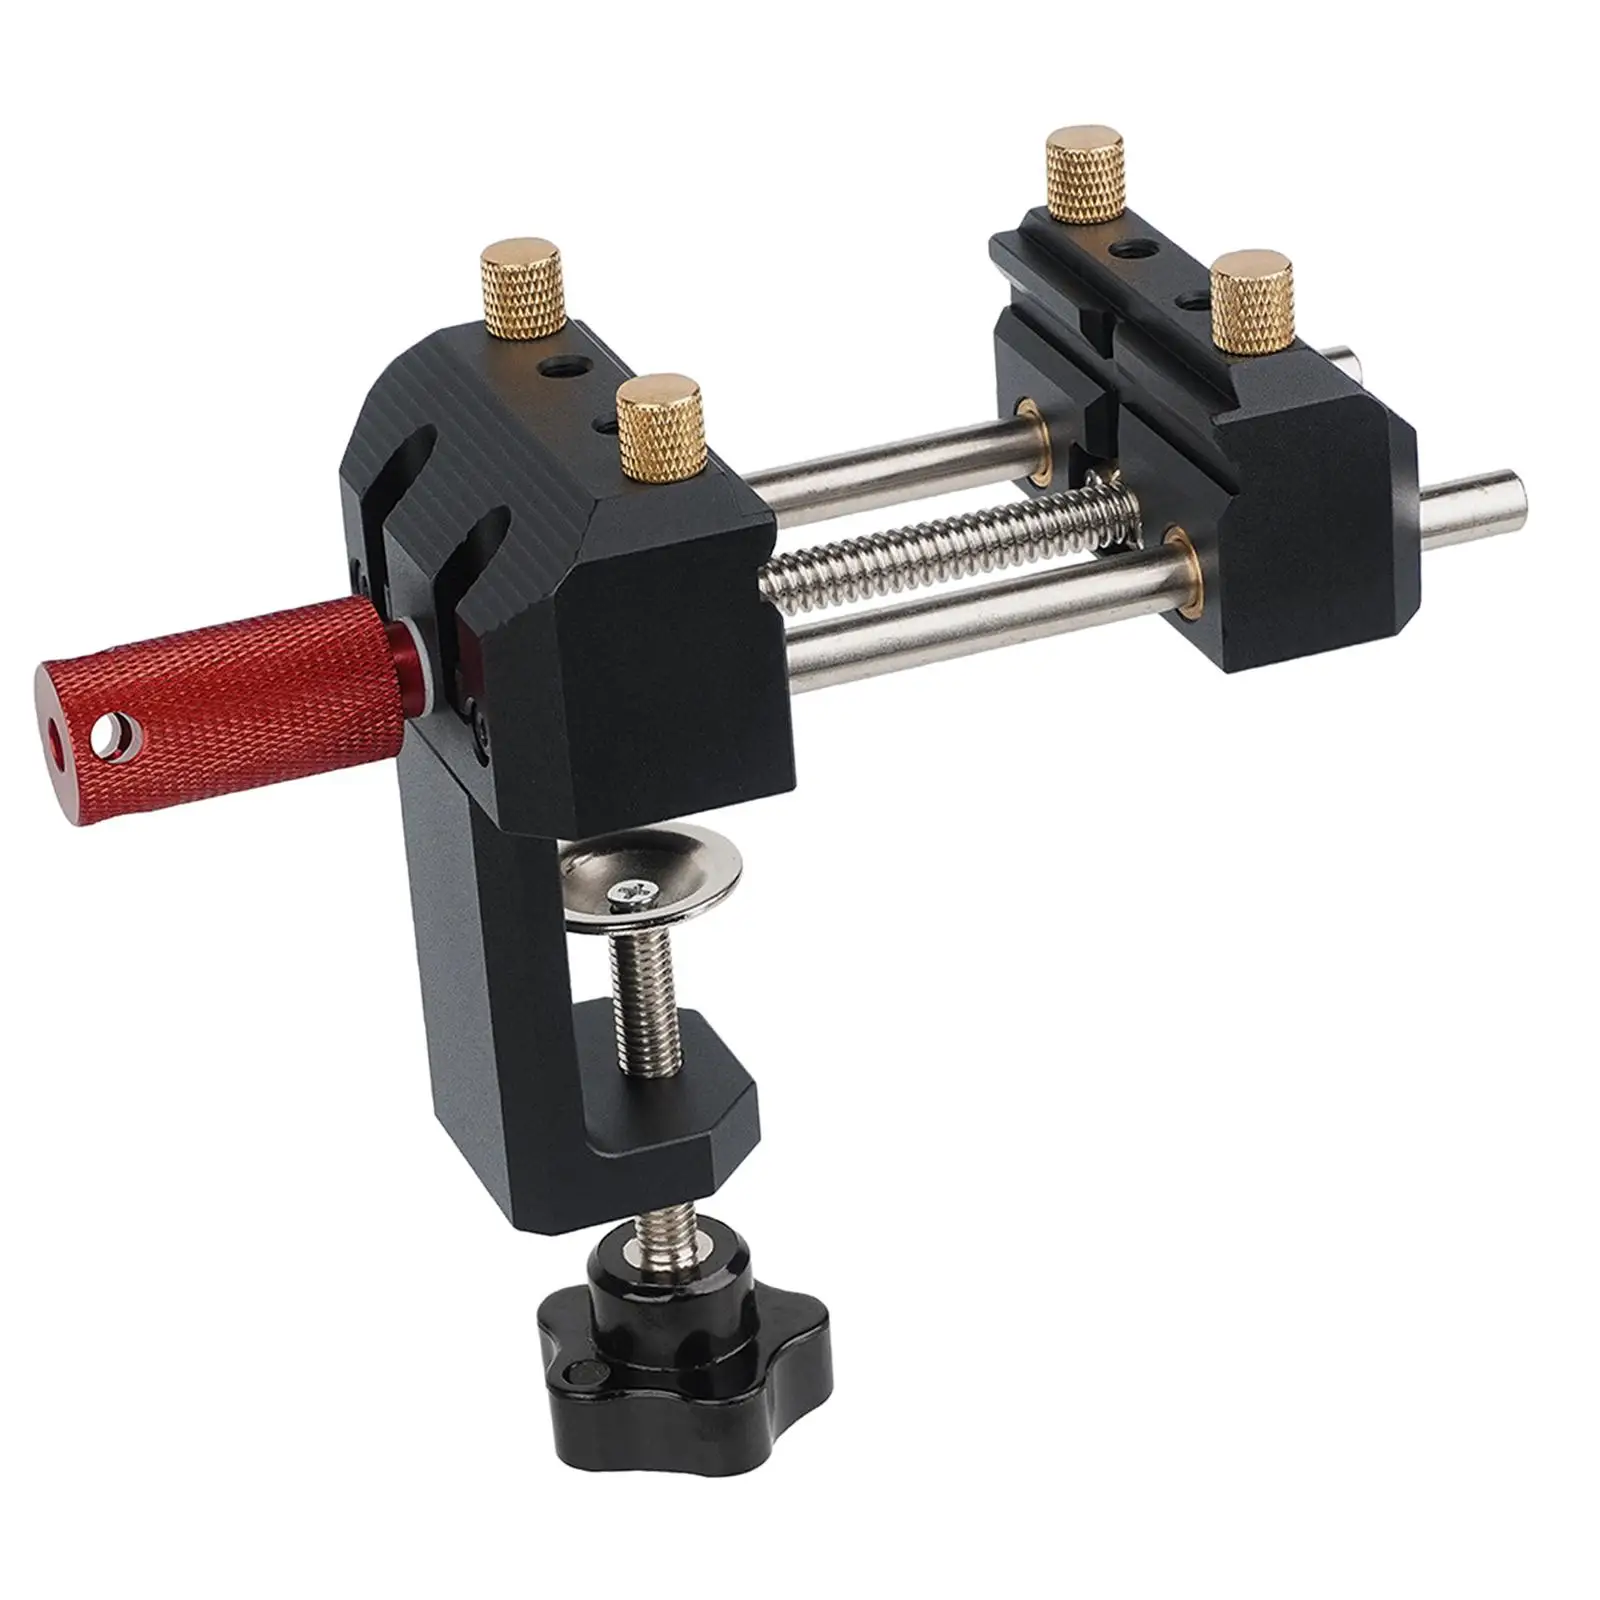 Universal Table Bench Vice Clamp Fixing Tool Accessories Woodworking Clamps for Jewelry Making Carving Metalworking Grinding